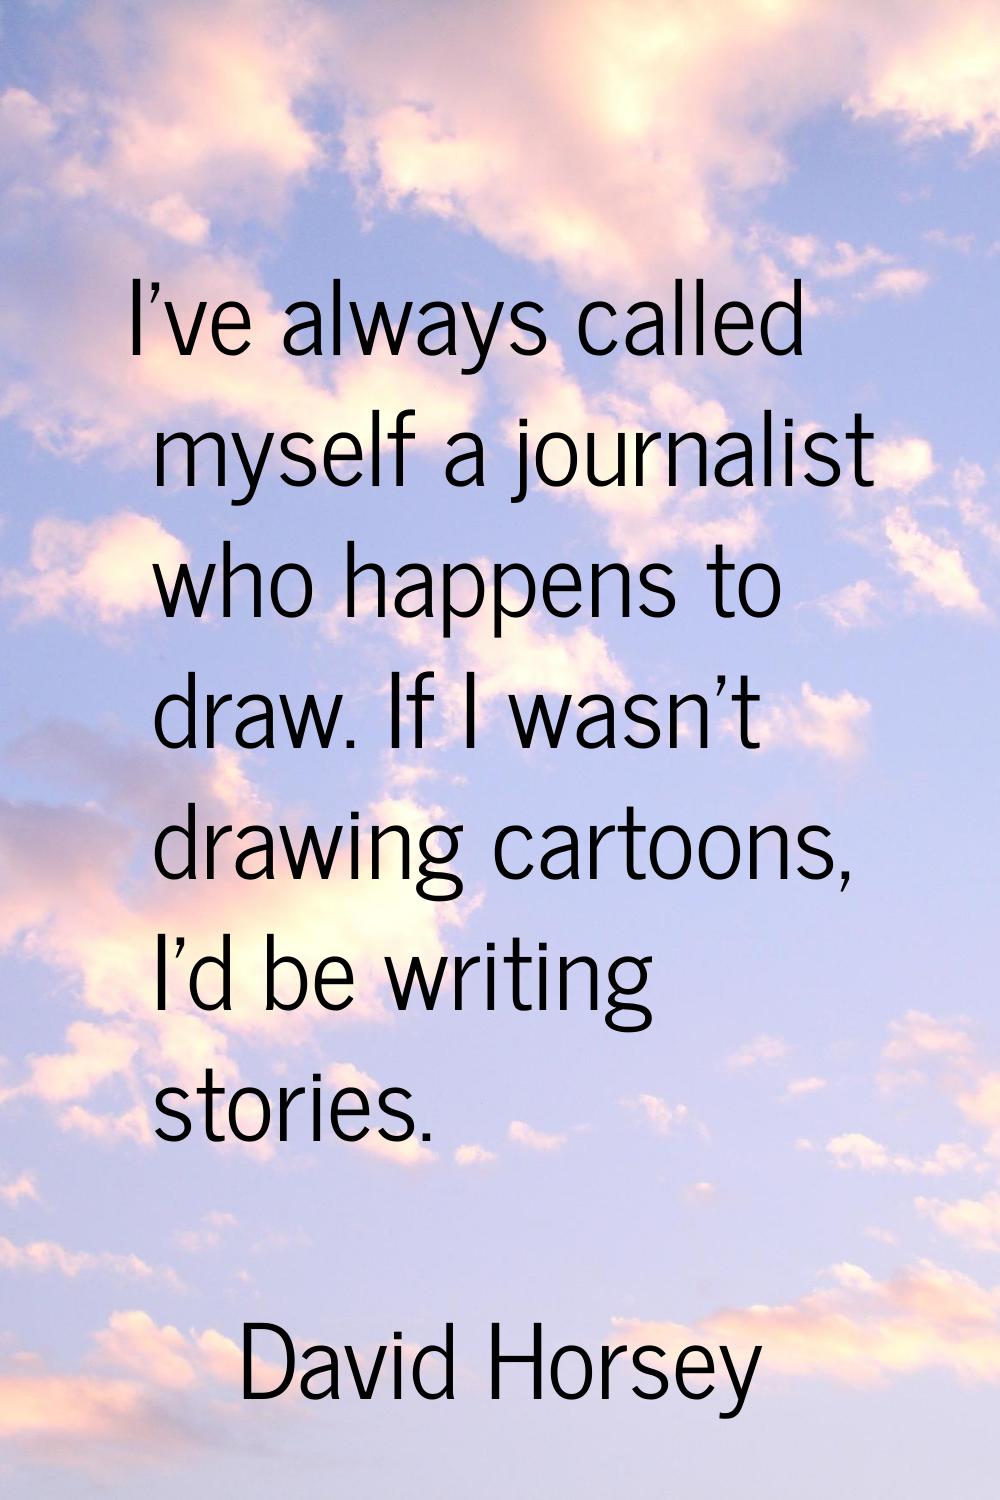 I've always called myself a journalist who happens to draw. If I wasn't drawing cartoons, I'd be wr